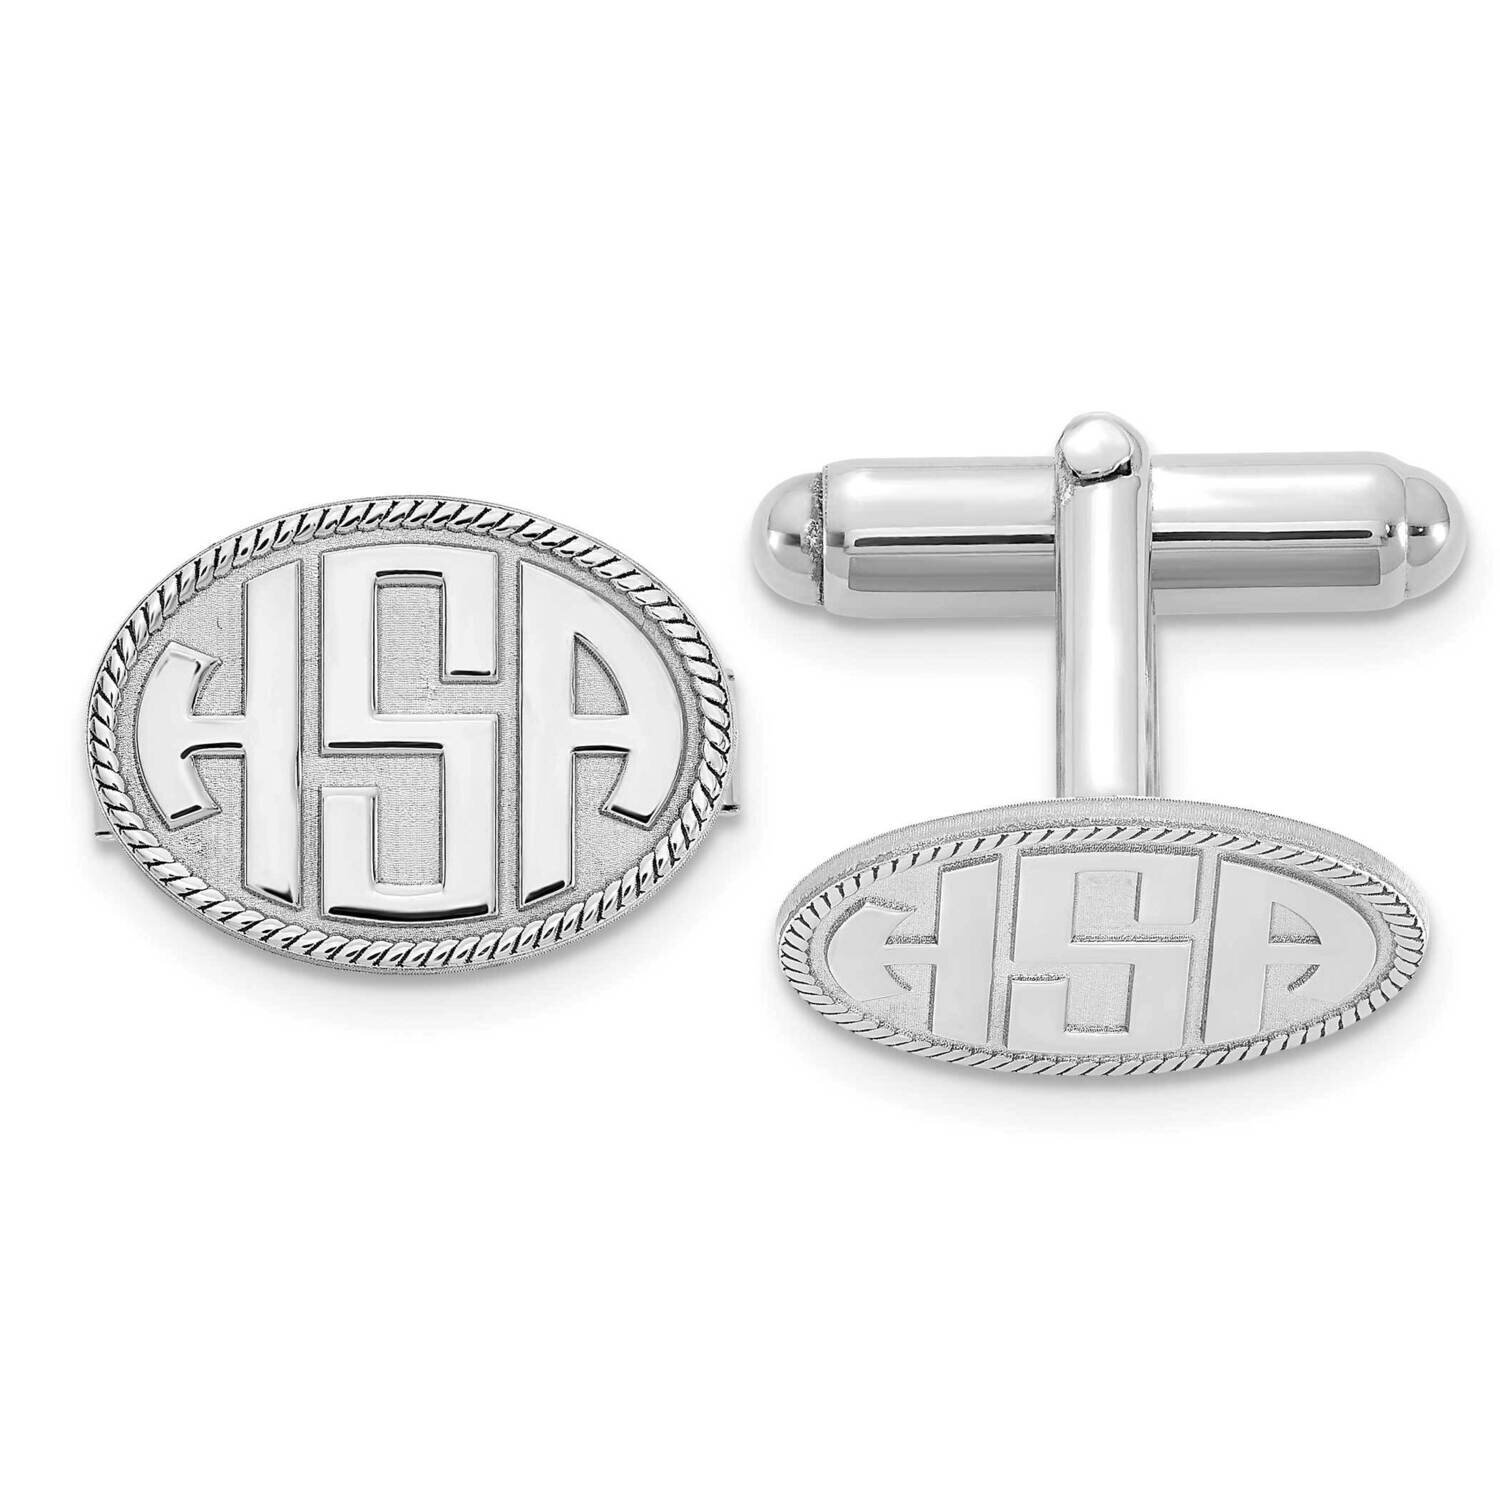 Oval with Boarder Raised Letters Monogram Cufflinks Sterling Silver Rhodium-plated XNA623SS